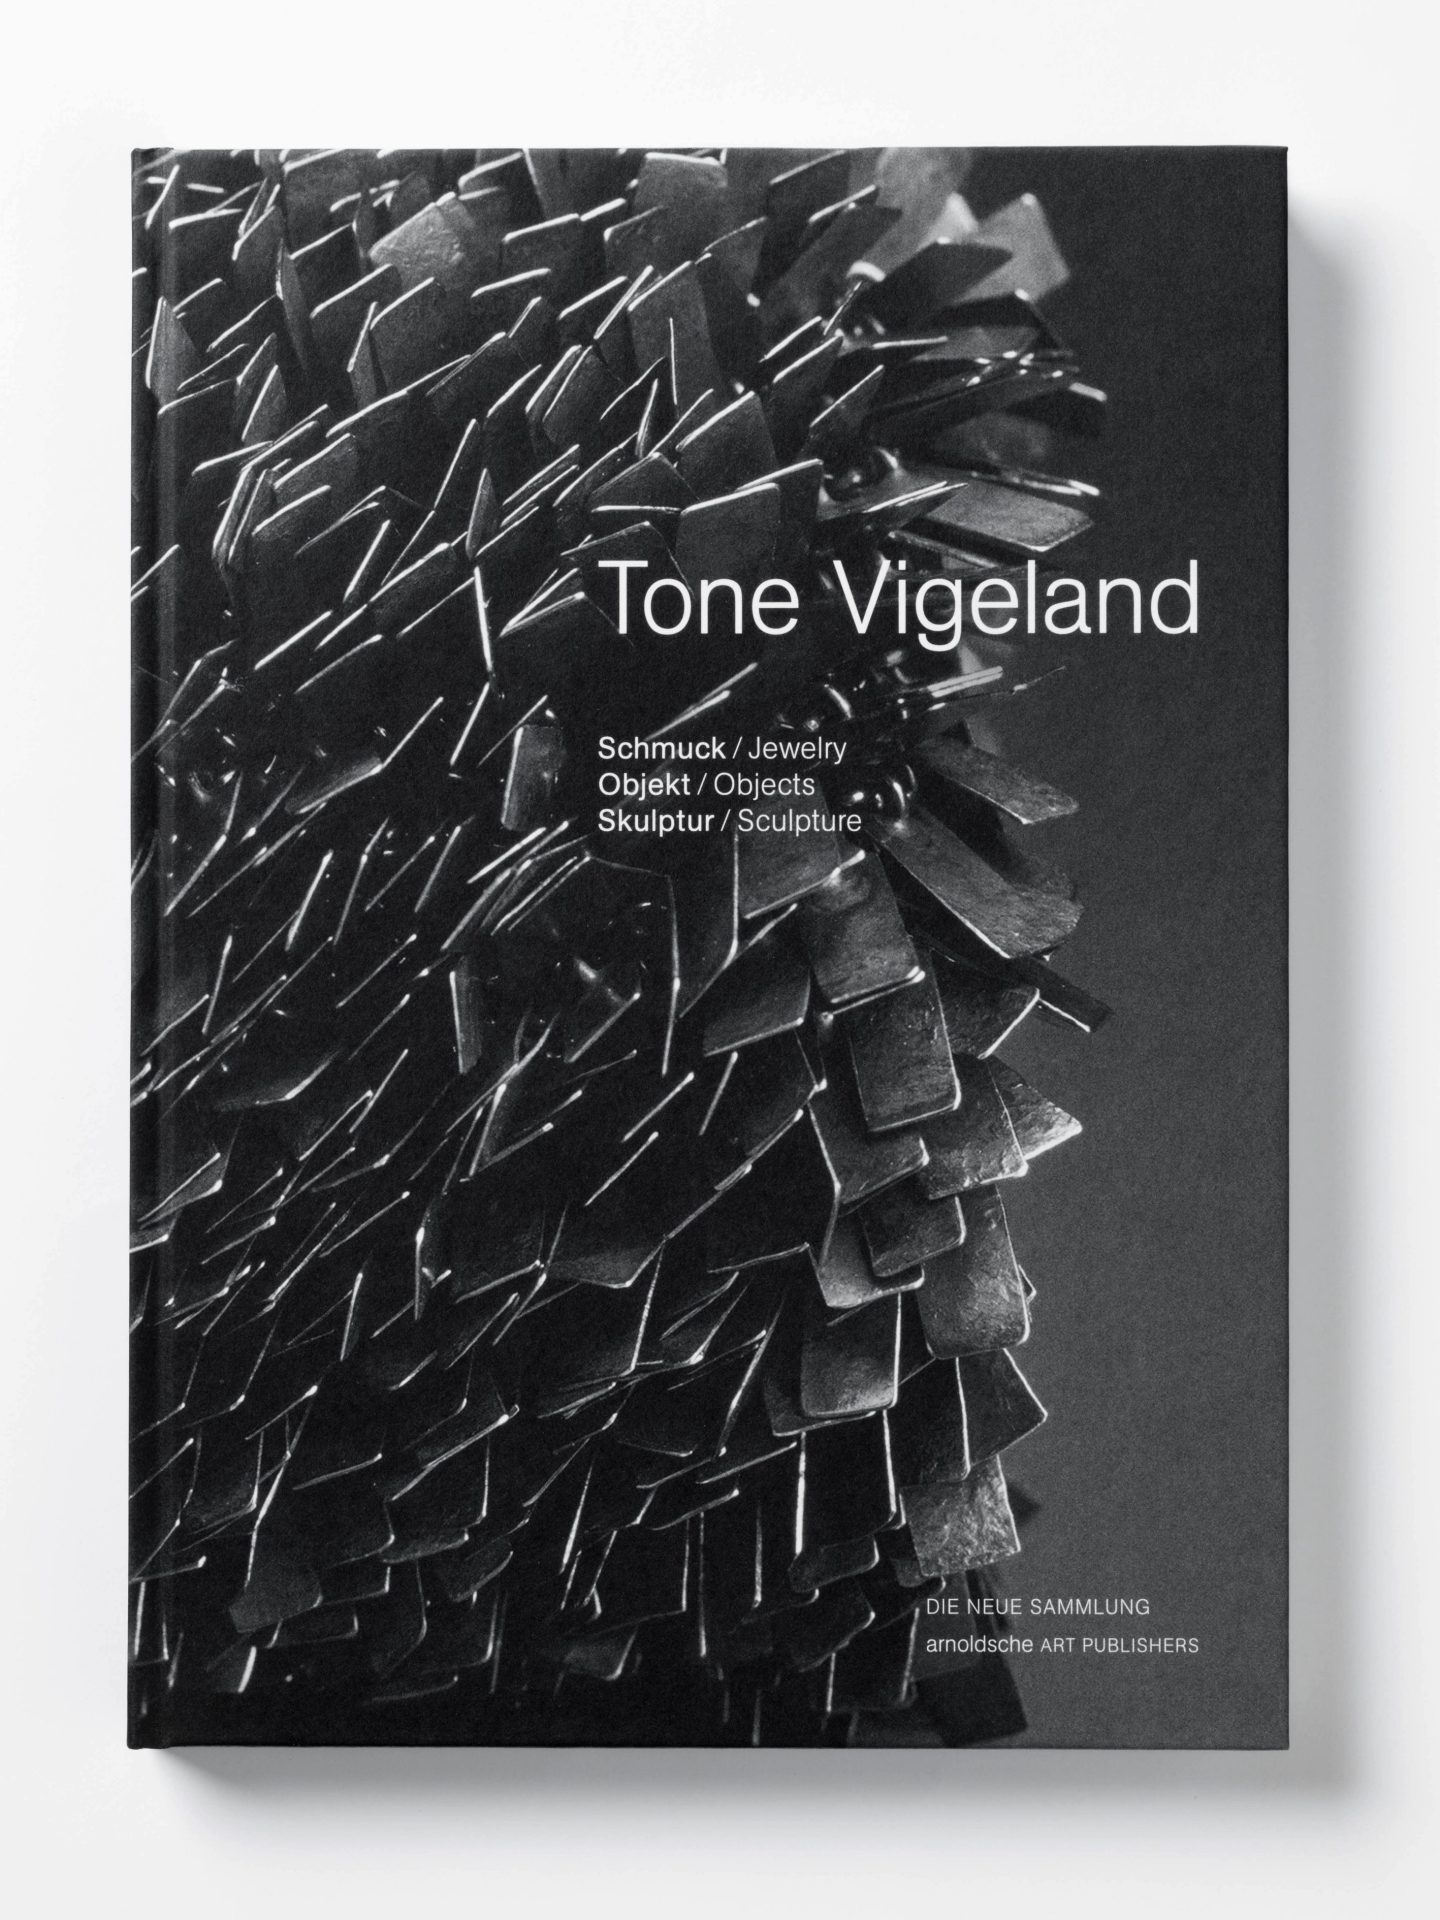 Cover of the exhibition catalogue. Black and white photograph of metal sheets on the left edge of the book. Above it is written in white, thin lettering Tone Vigeland.